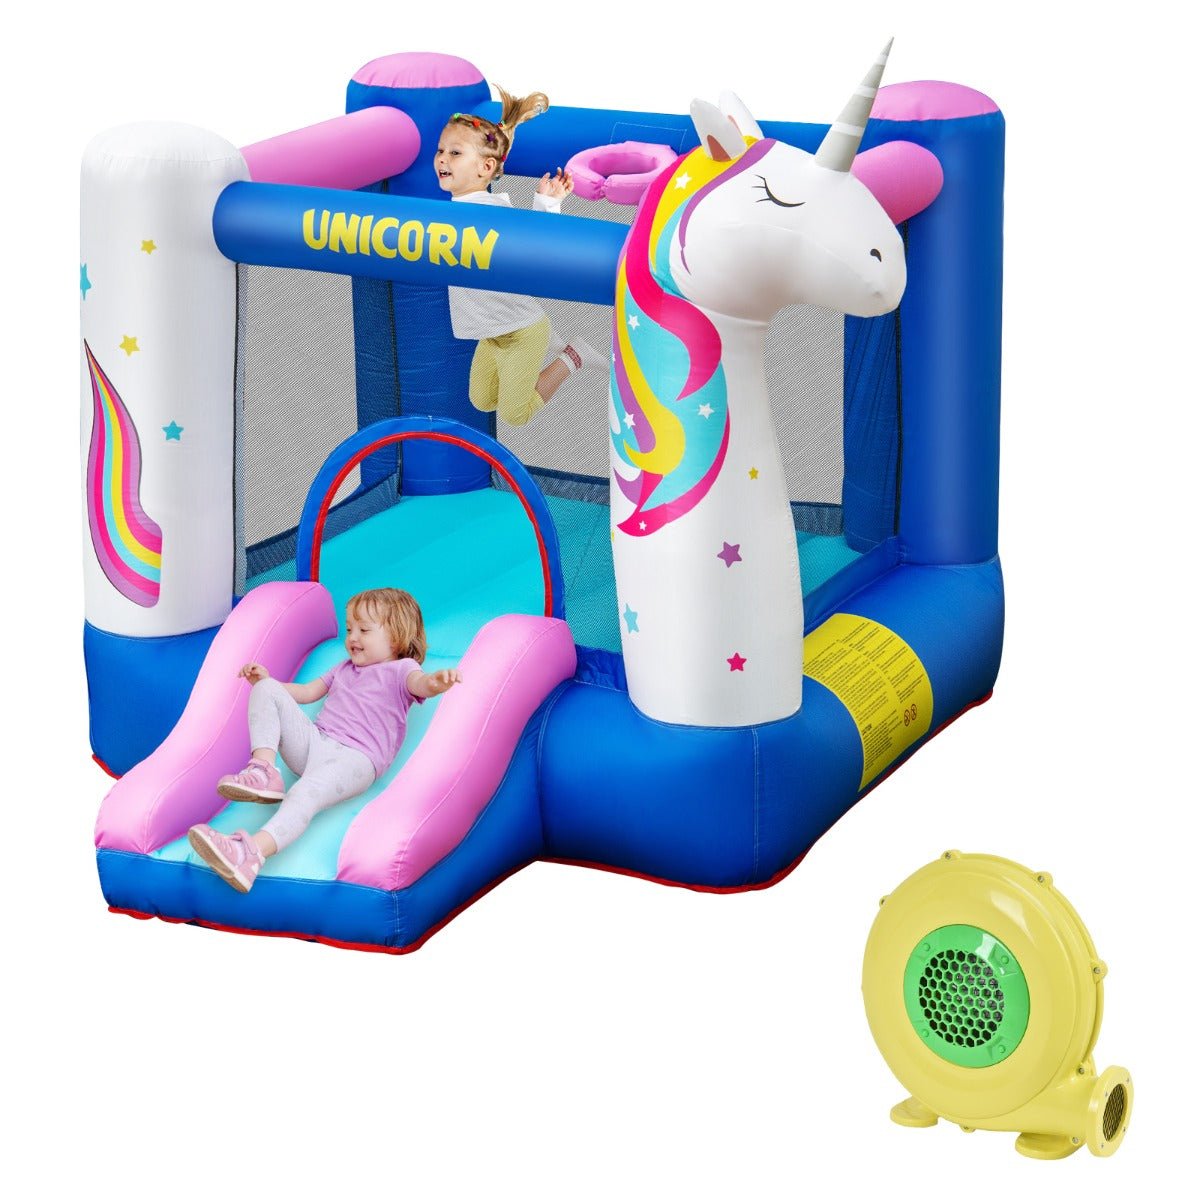 Inflatable Unicorn Bounce House with Slide & Hoop - Magical Fun (Blower Included)